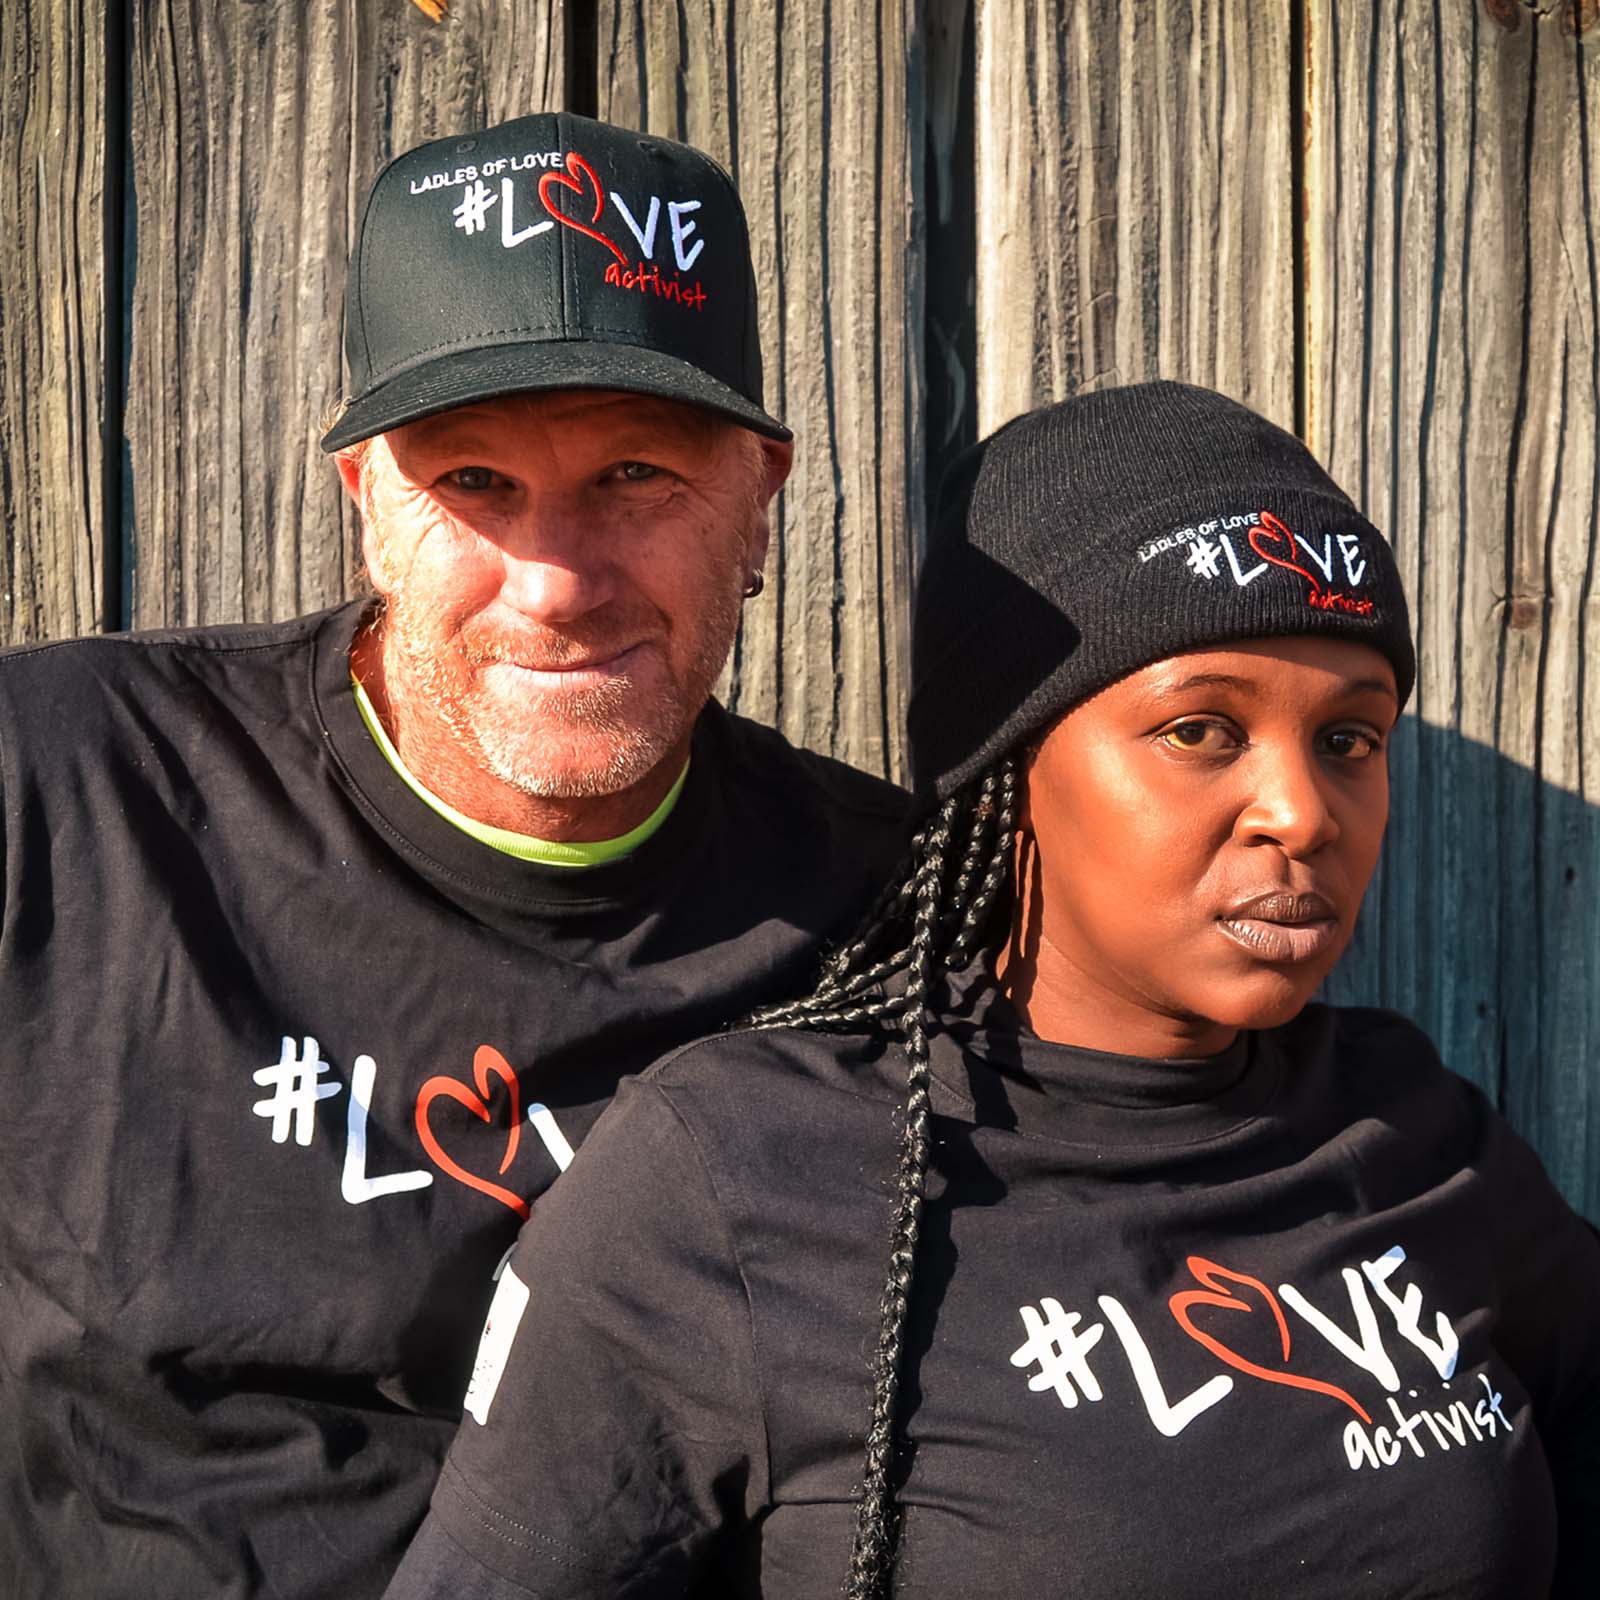 Group of south african people smiling, making heart shapes and standing with ladles of love branded clothing for the new online store where you can shop for charity